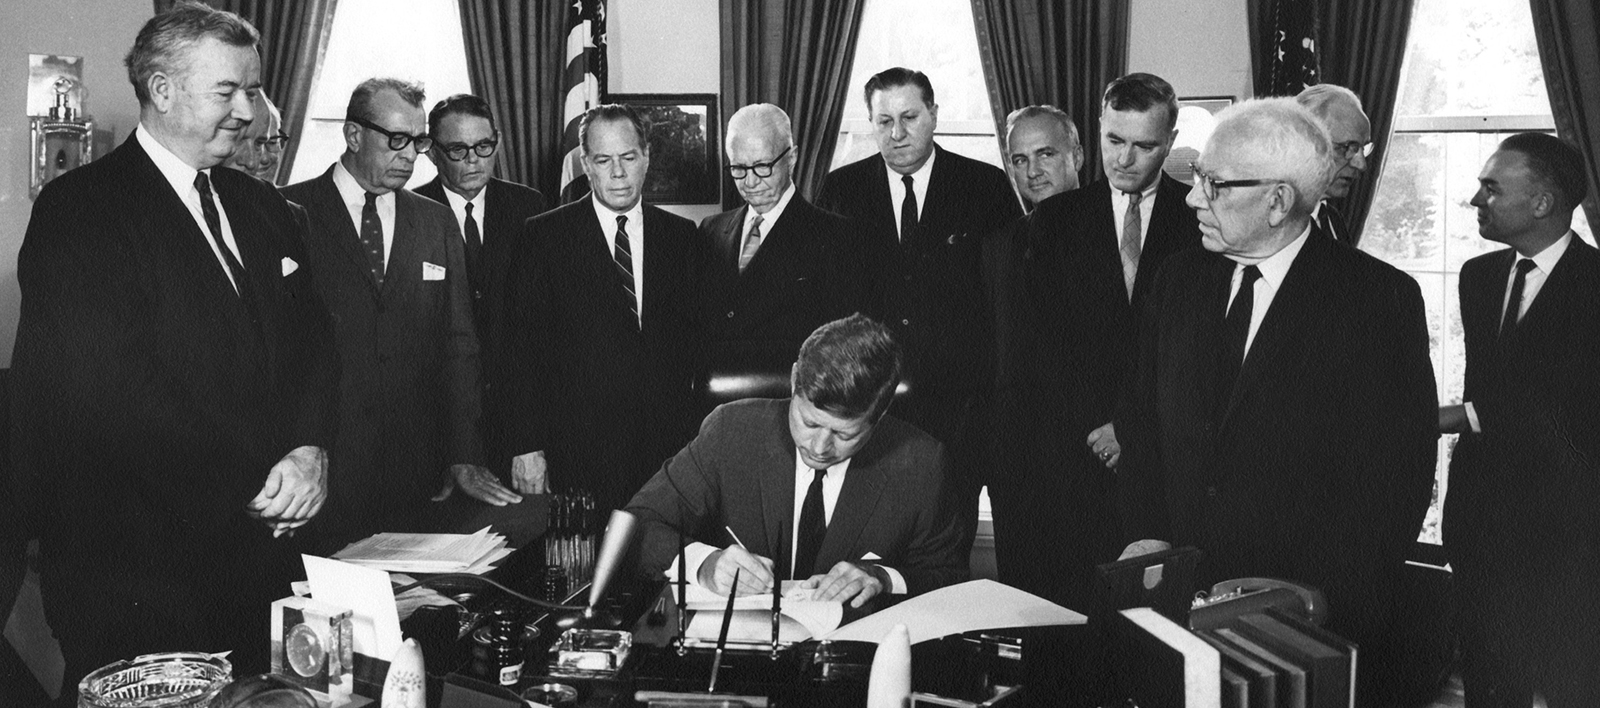 On November 3, 1961, President John F. Kennedy signs the Foreign Assistance Bill creating USAID